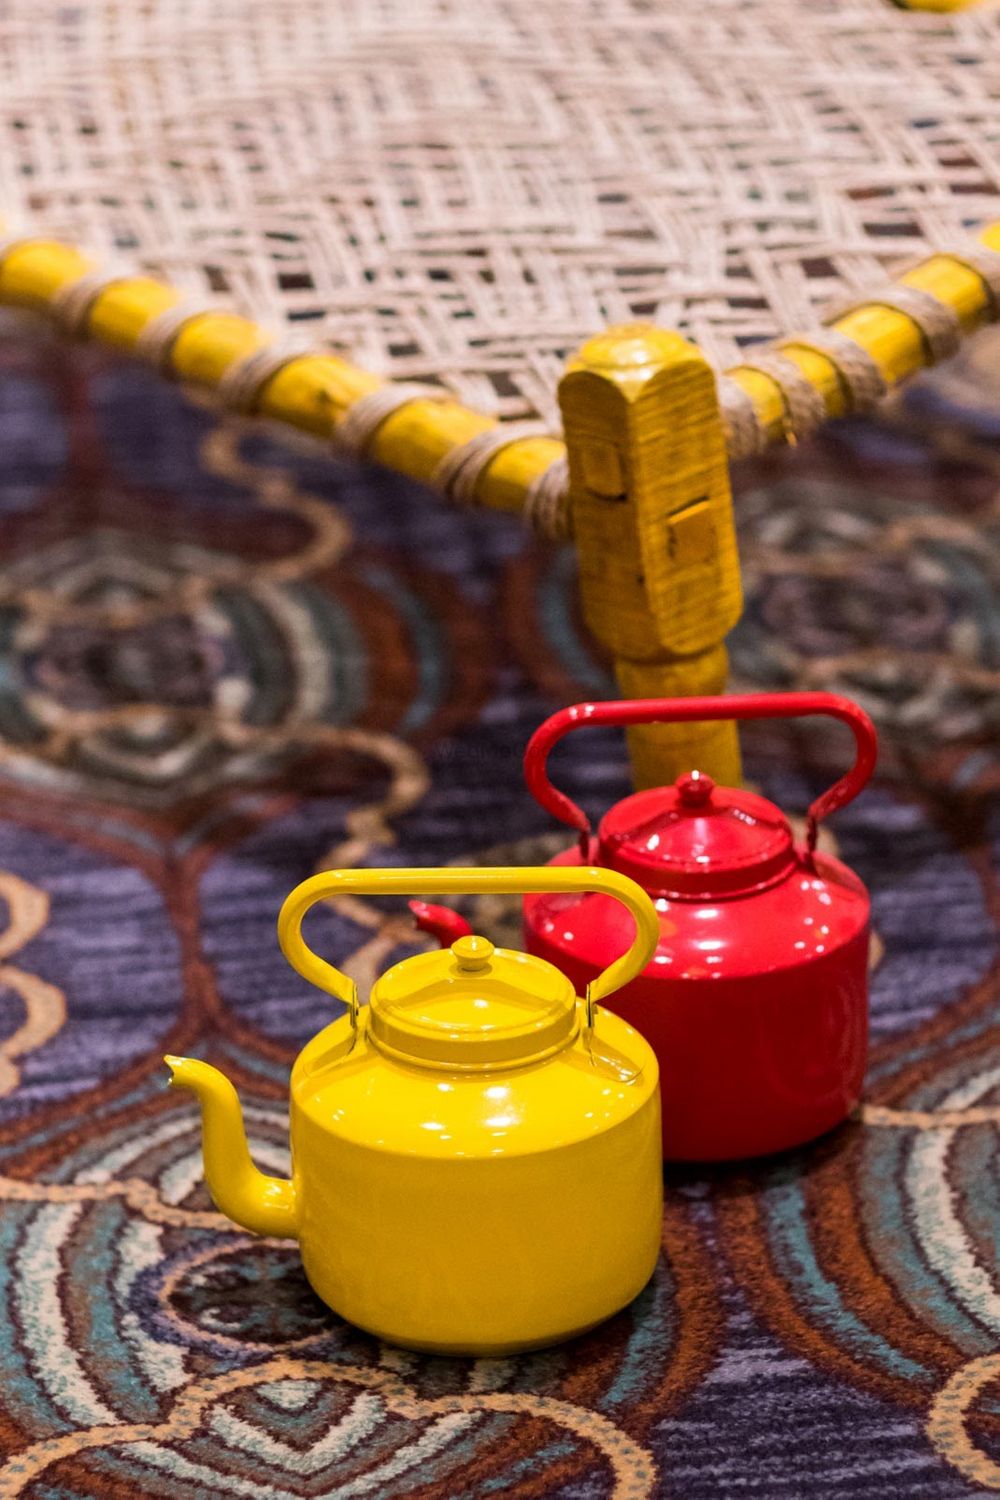 Photo of Red and yellow tea kettles in decor